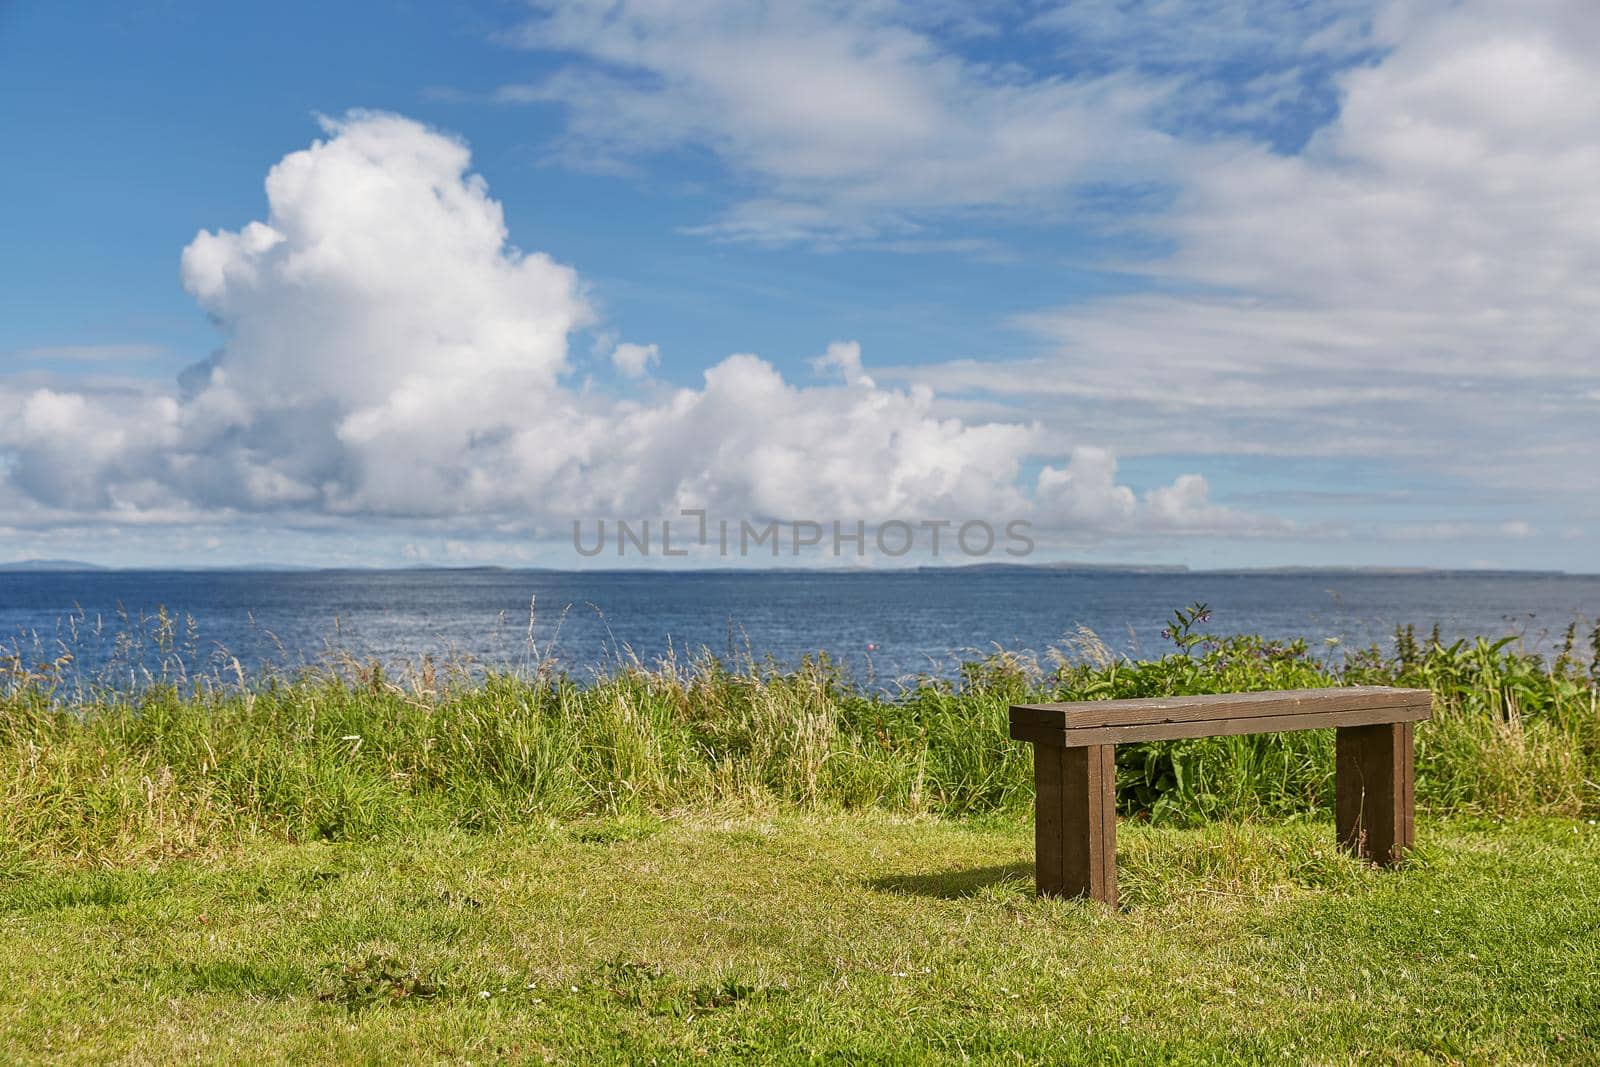 Landscape and relaxing view near John o'Groats area. Highlights nothern most mainland of Scotland